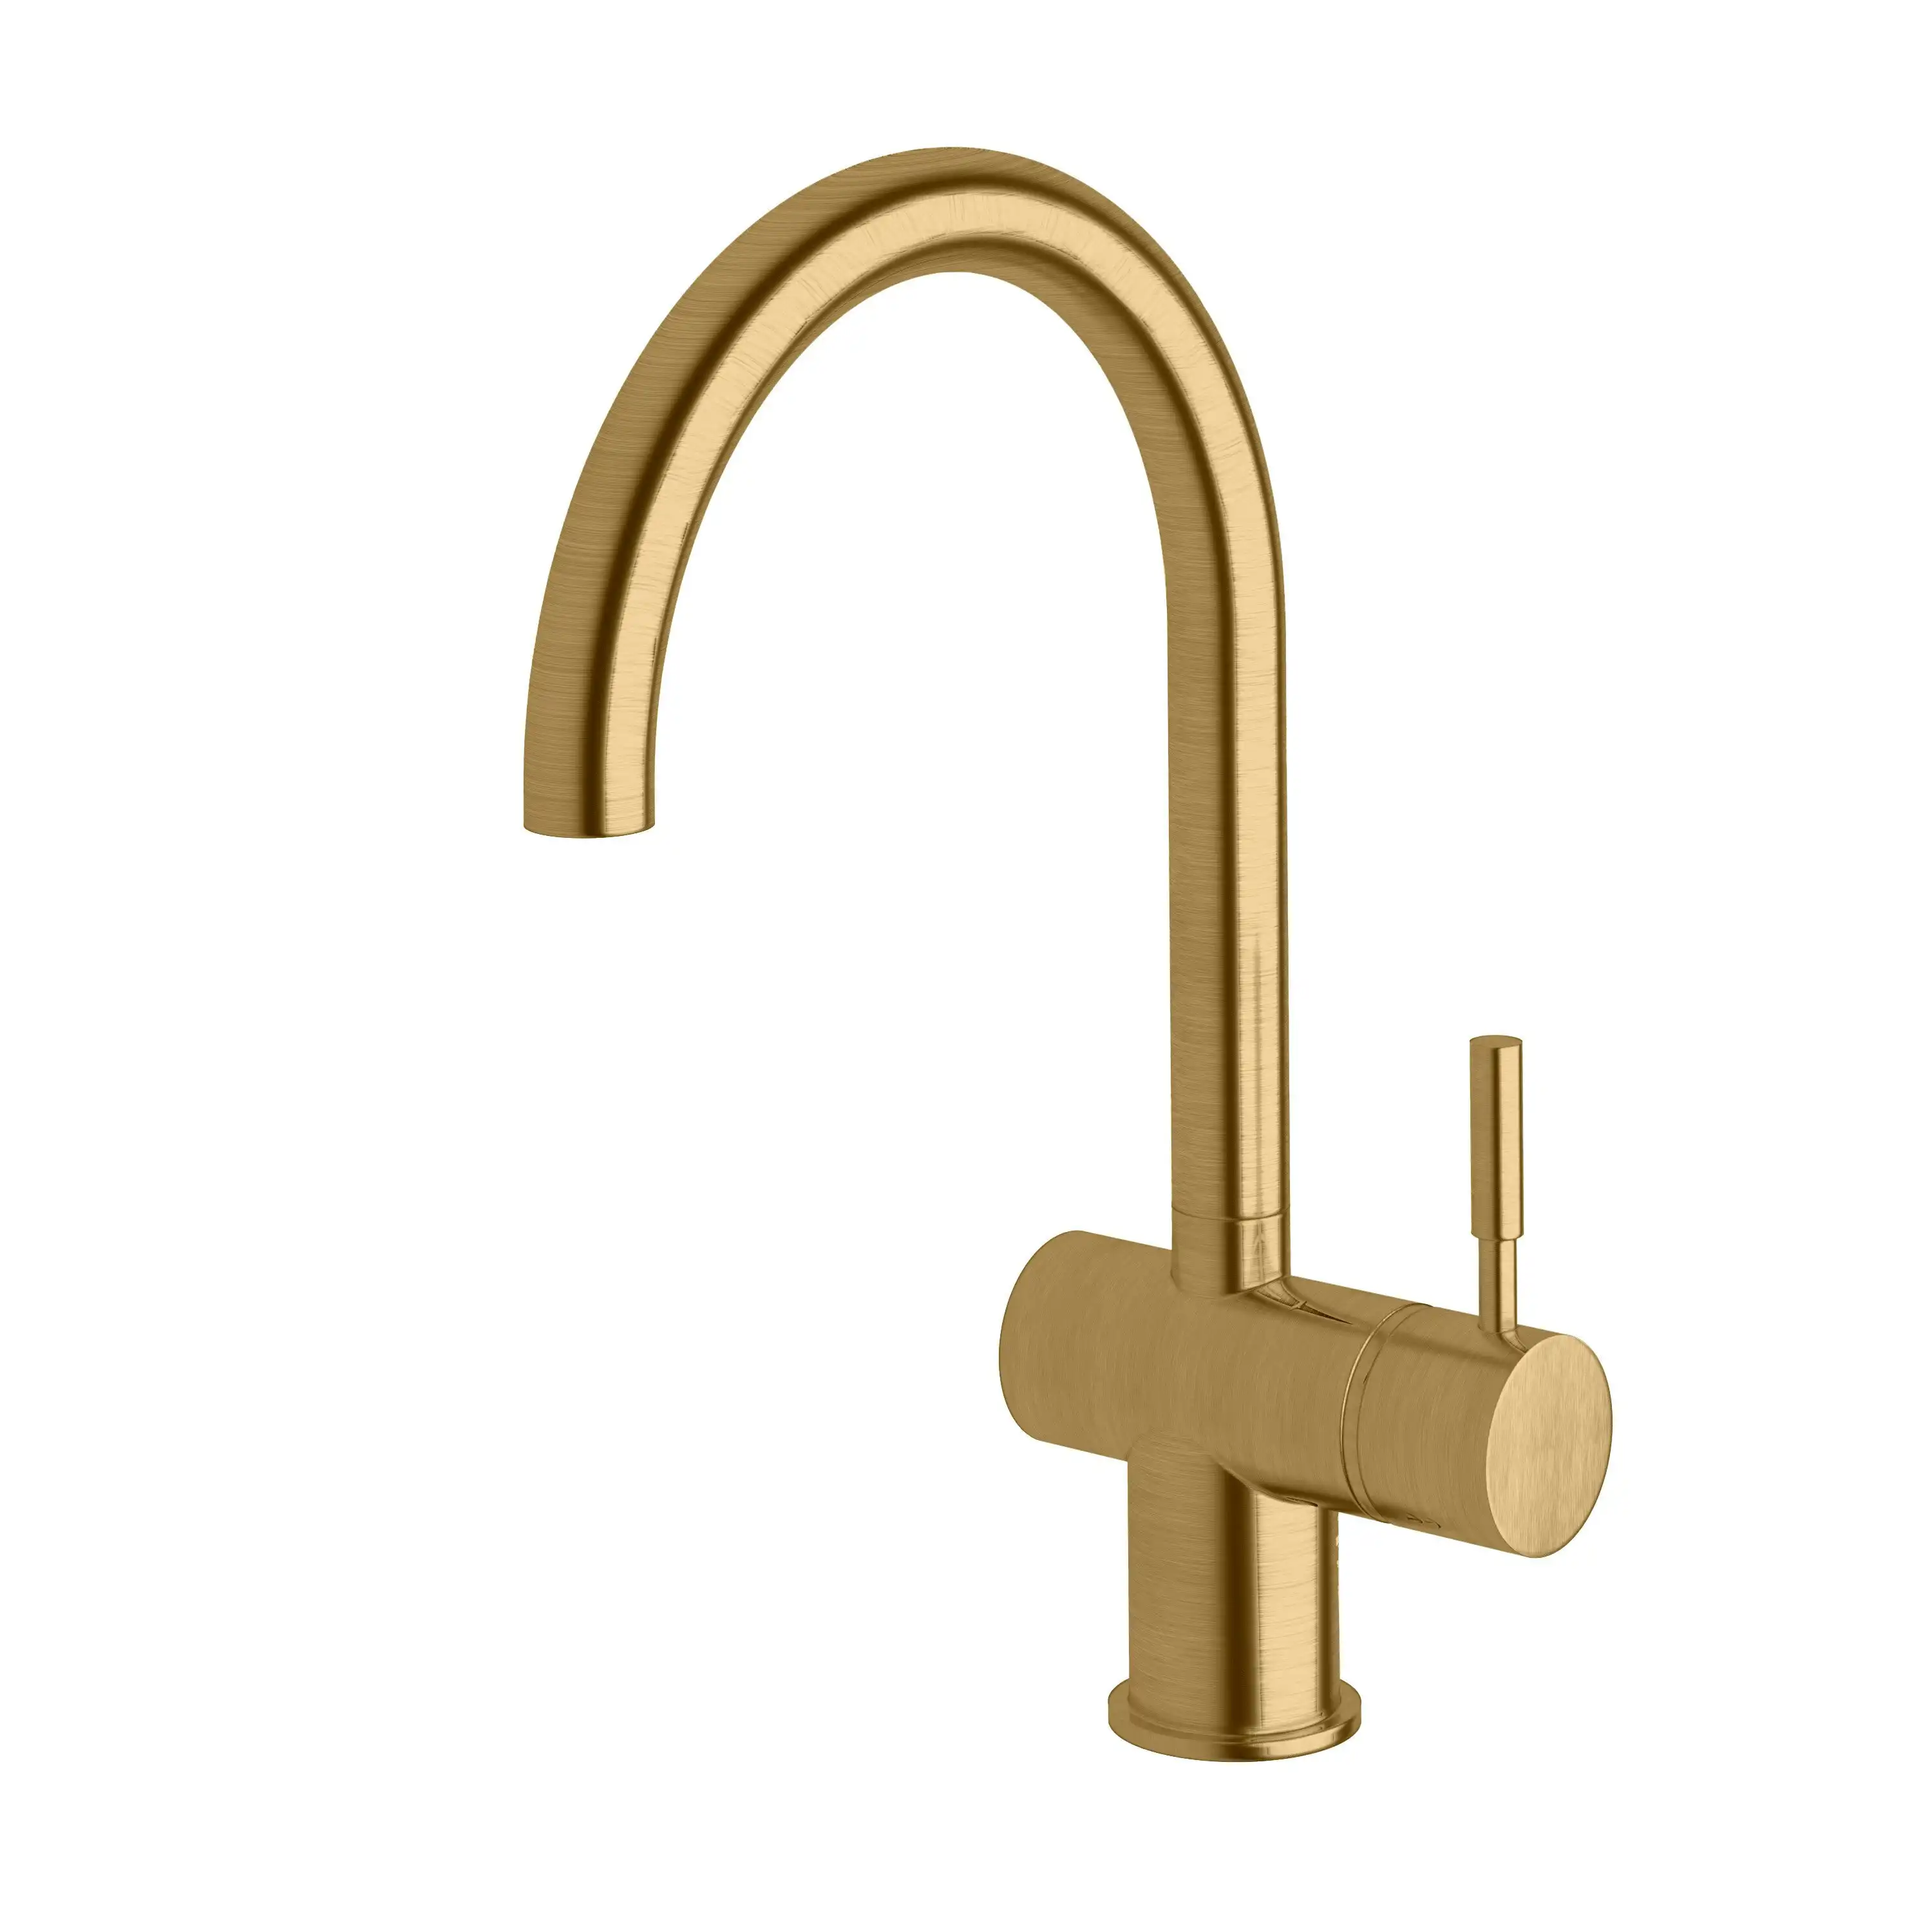 Sussex Taps Voda Sink Mixer Curved Brushed Gold